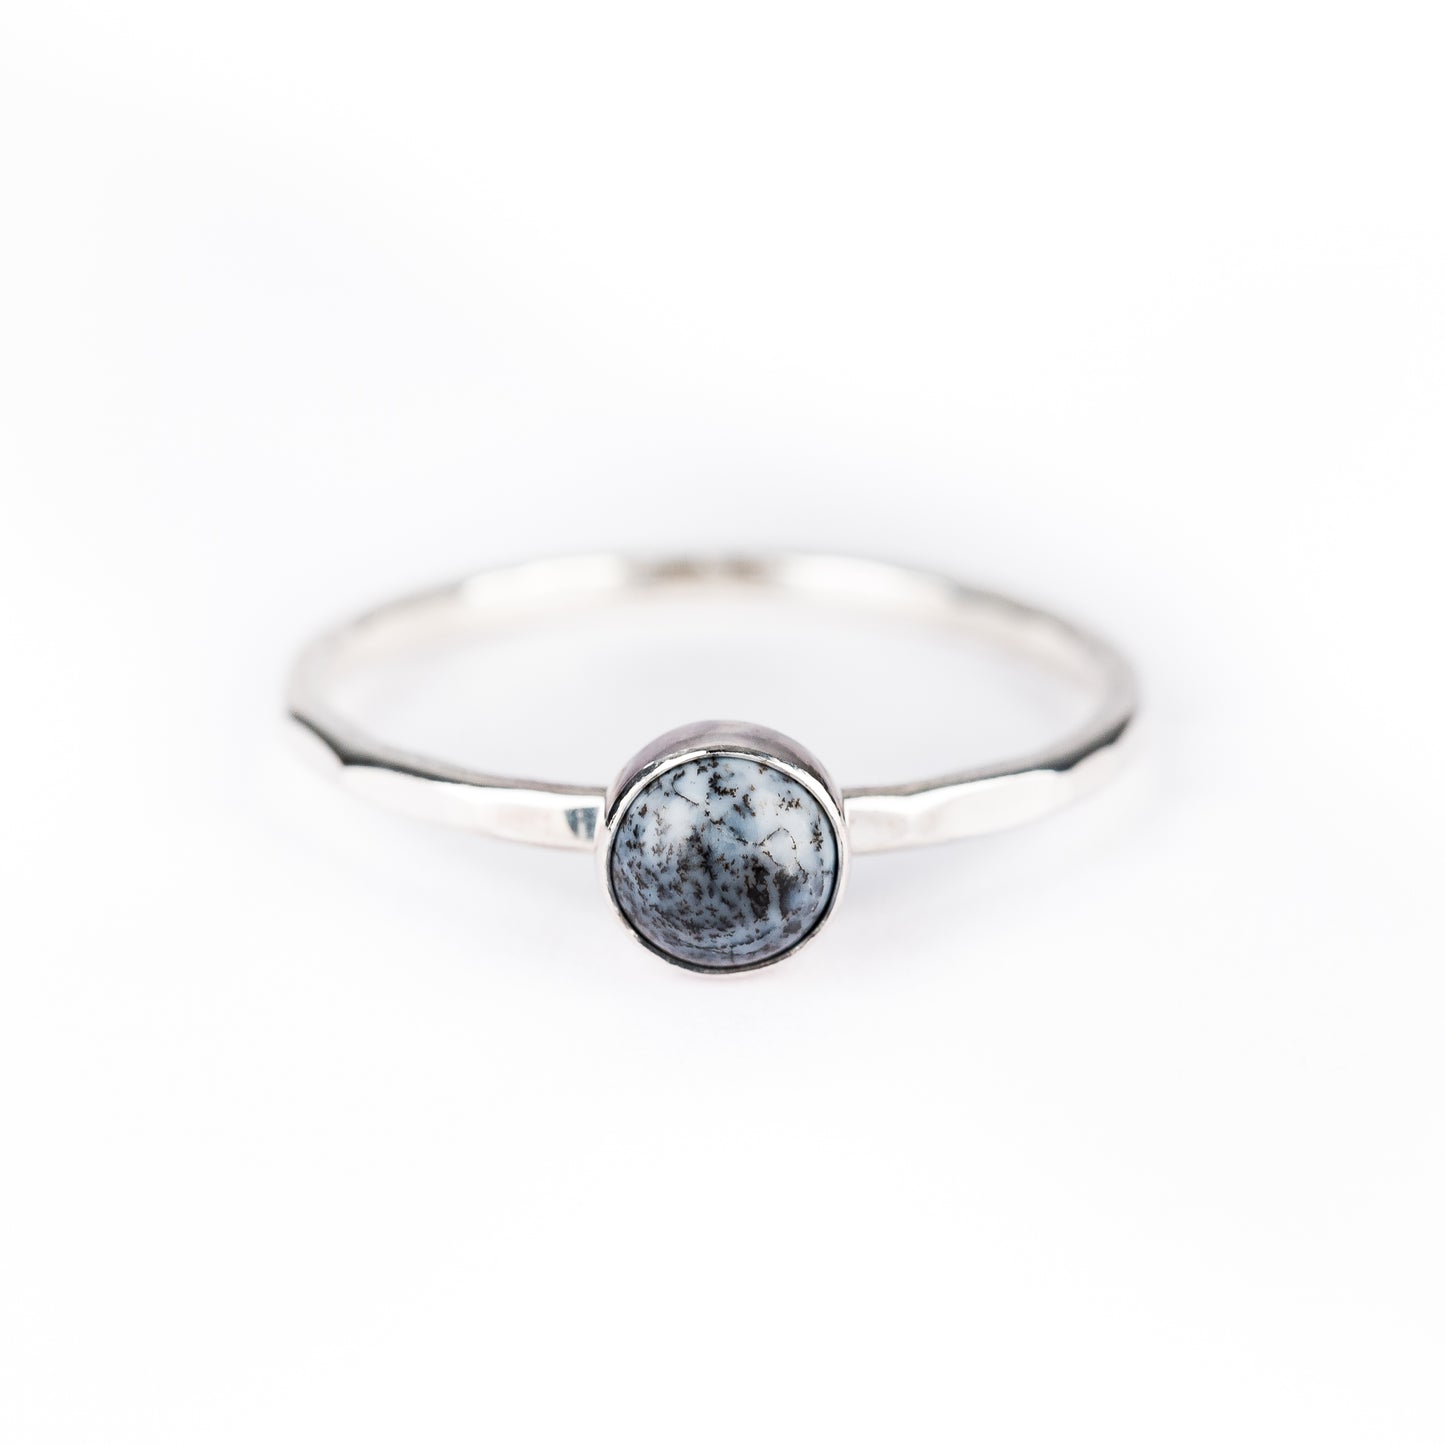 Dendritic Agate Stacking Ring - Silver